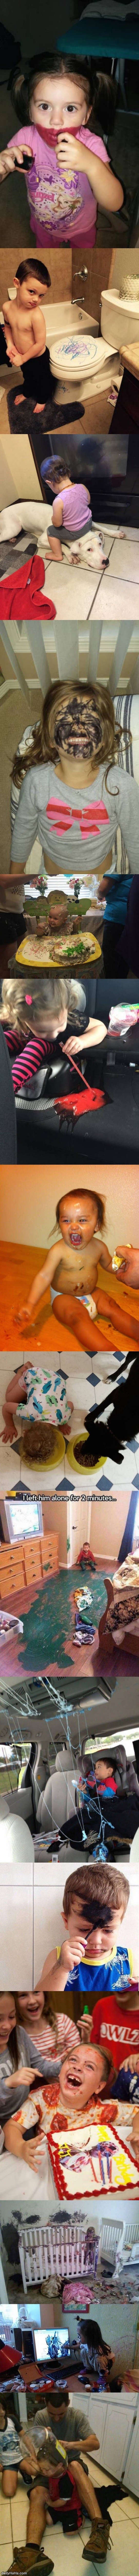 messy kids funny picture